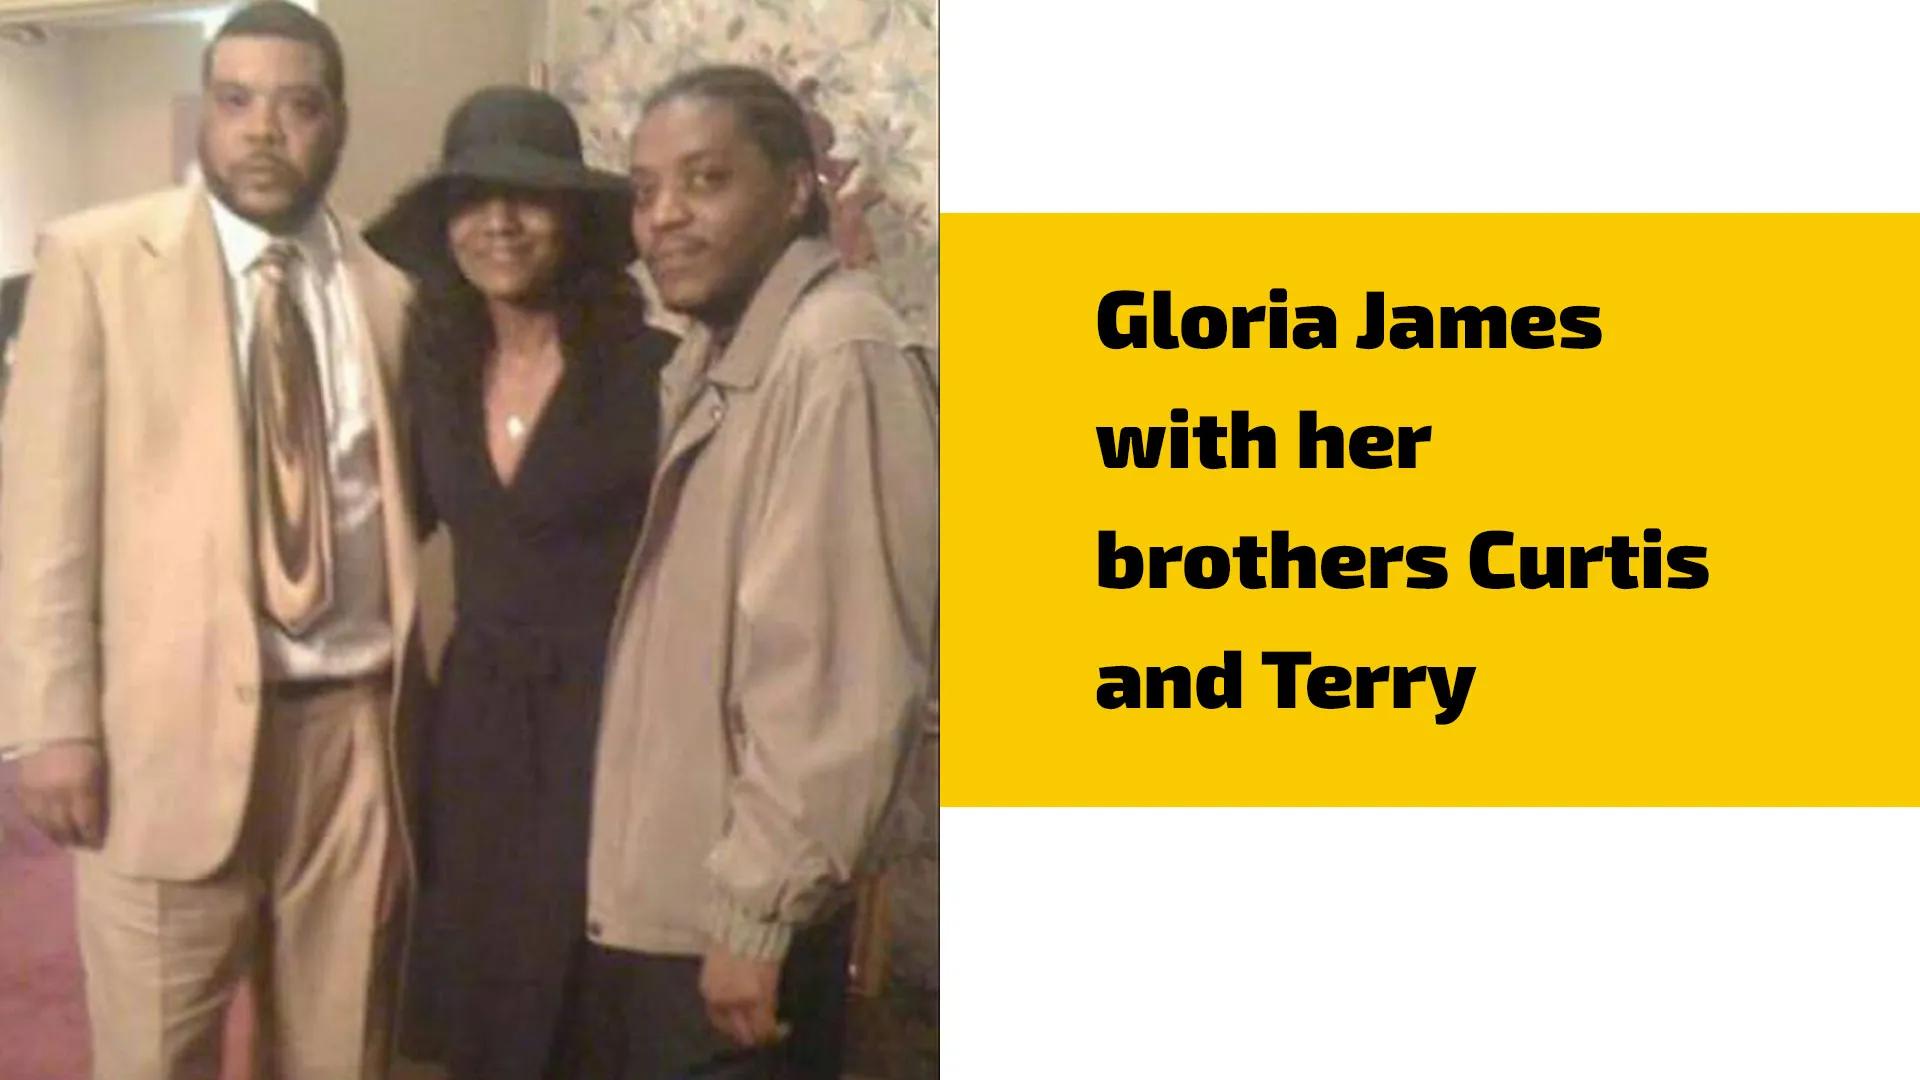 Gloria James with her brothers Curtis and Terry